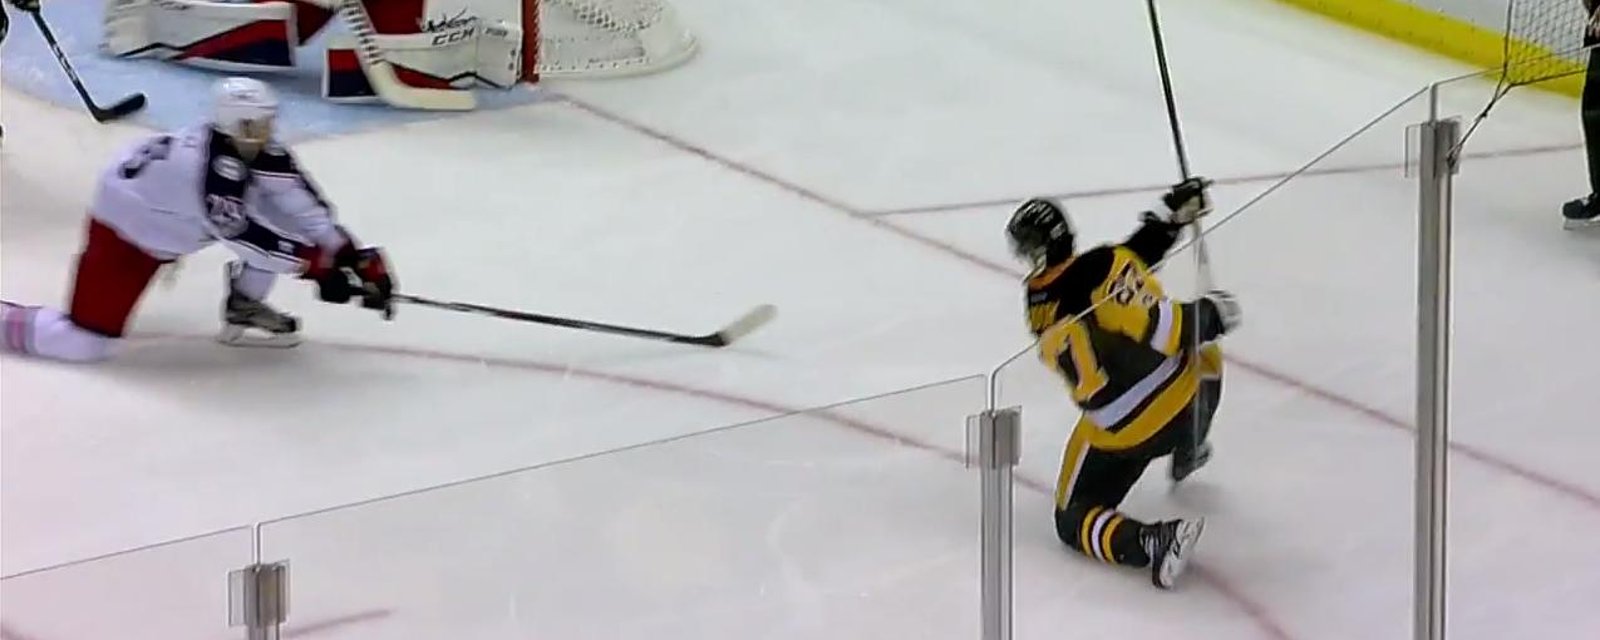 Crosby with the insane goal on an impossible angle. 